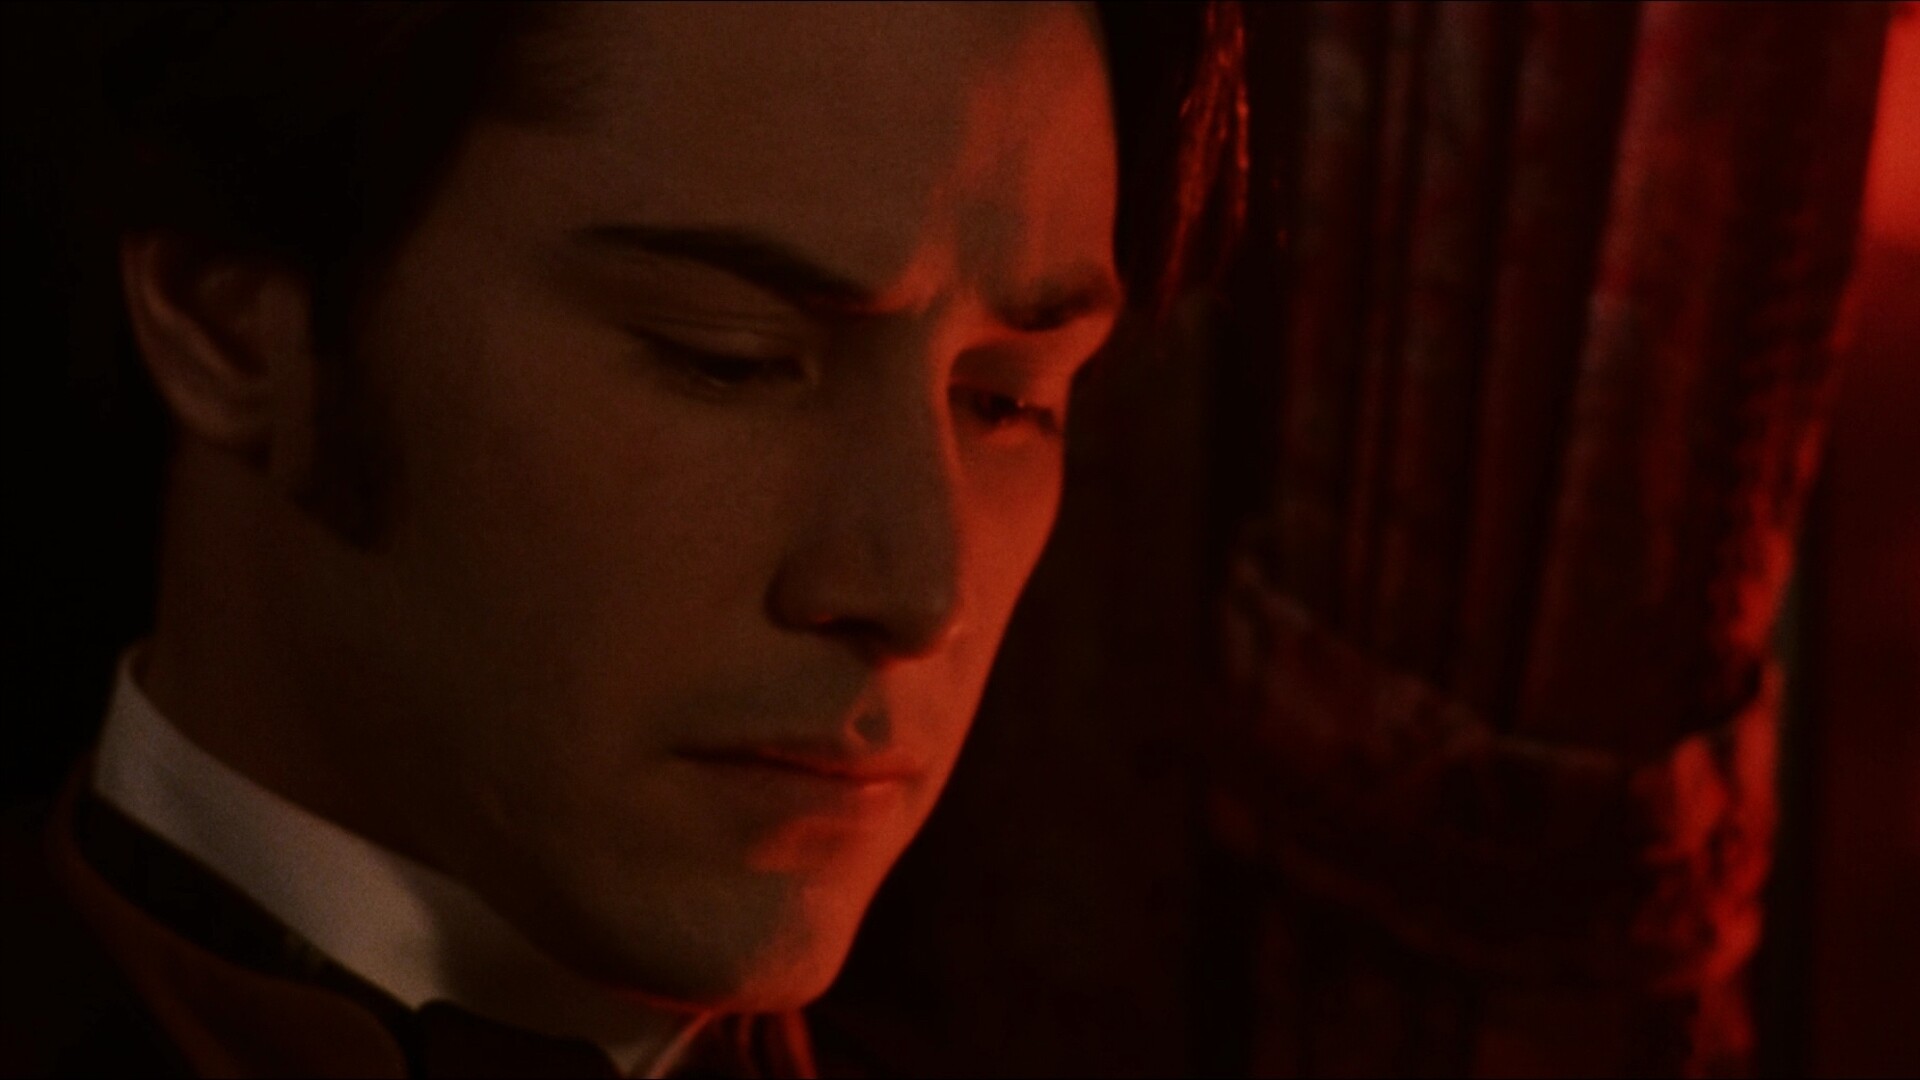 Keanu Reeves (Dracula): Directed and produced by Francis Ford Coppola, Harker. 1920x1080 Full HD Wallpaper.